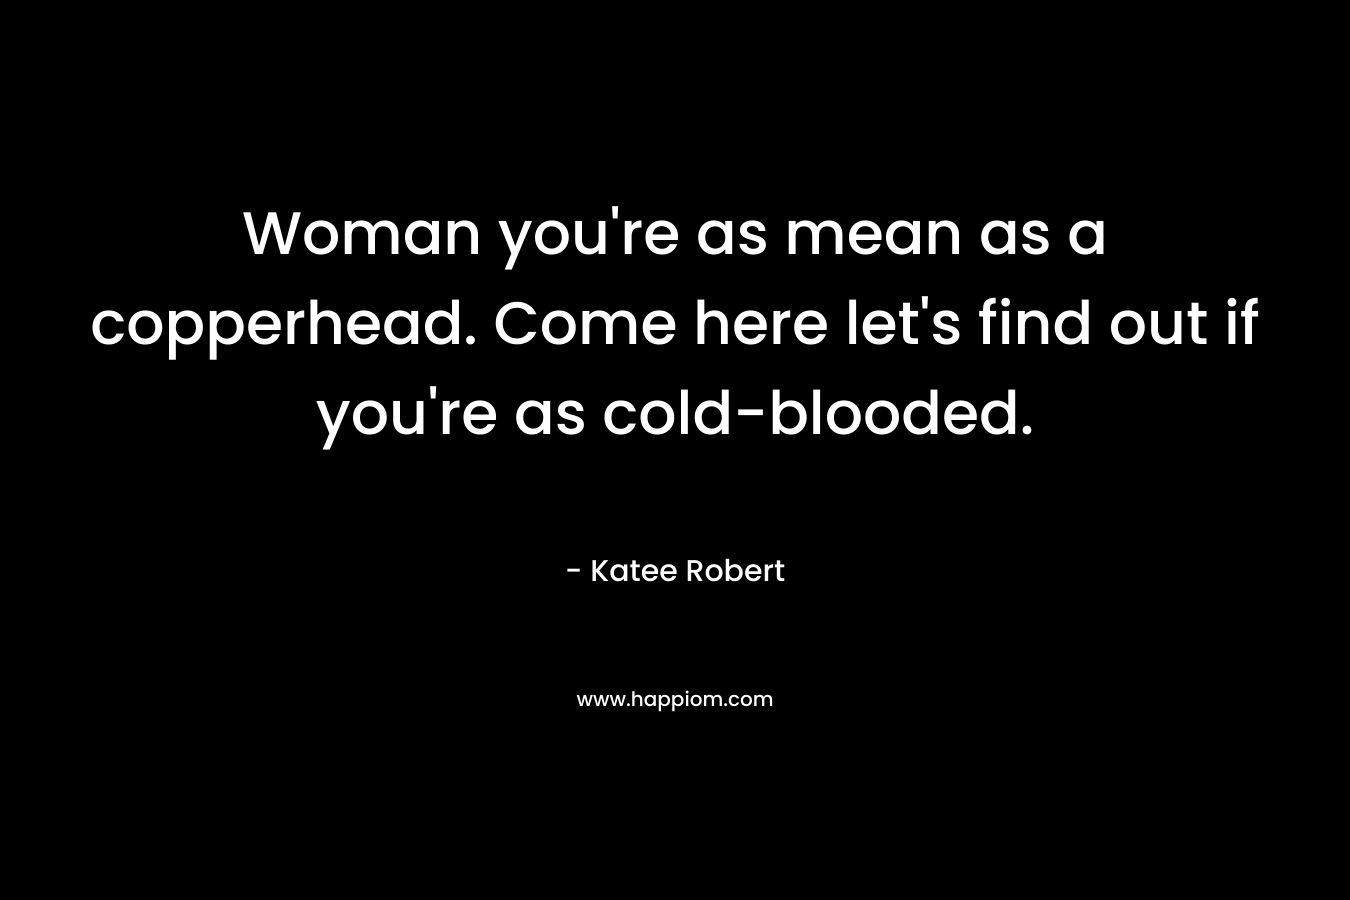 Woman you’re as mean as a copperhead. Come here let’s find out if you’re as cold-blooded. – Katee Robert